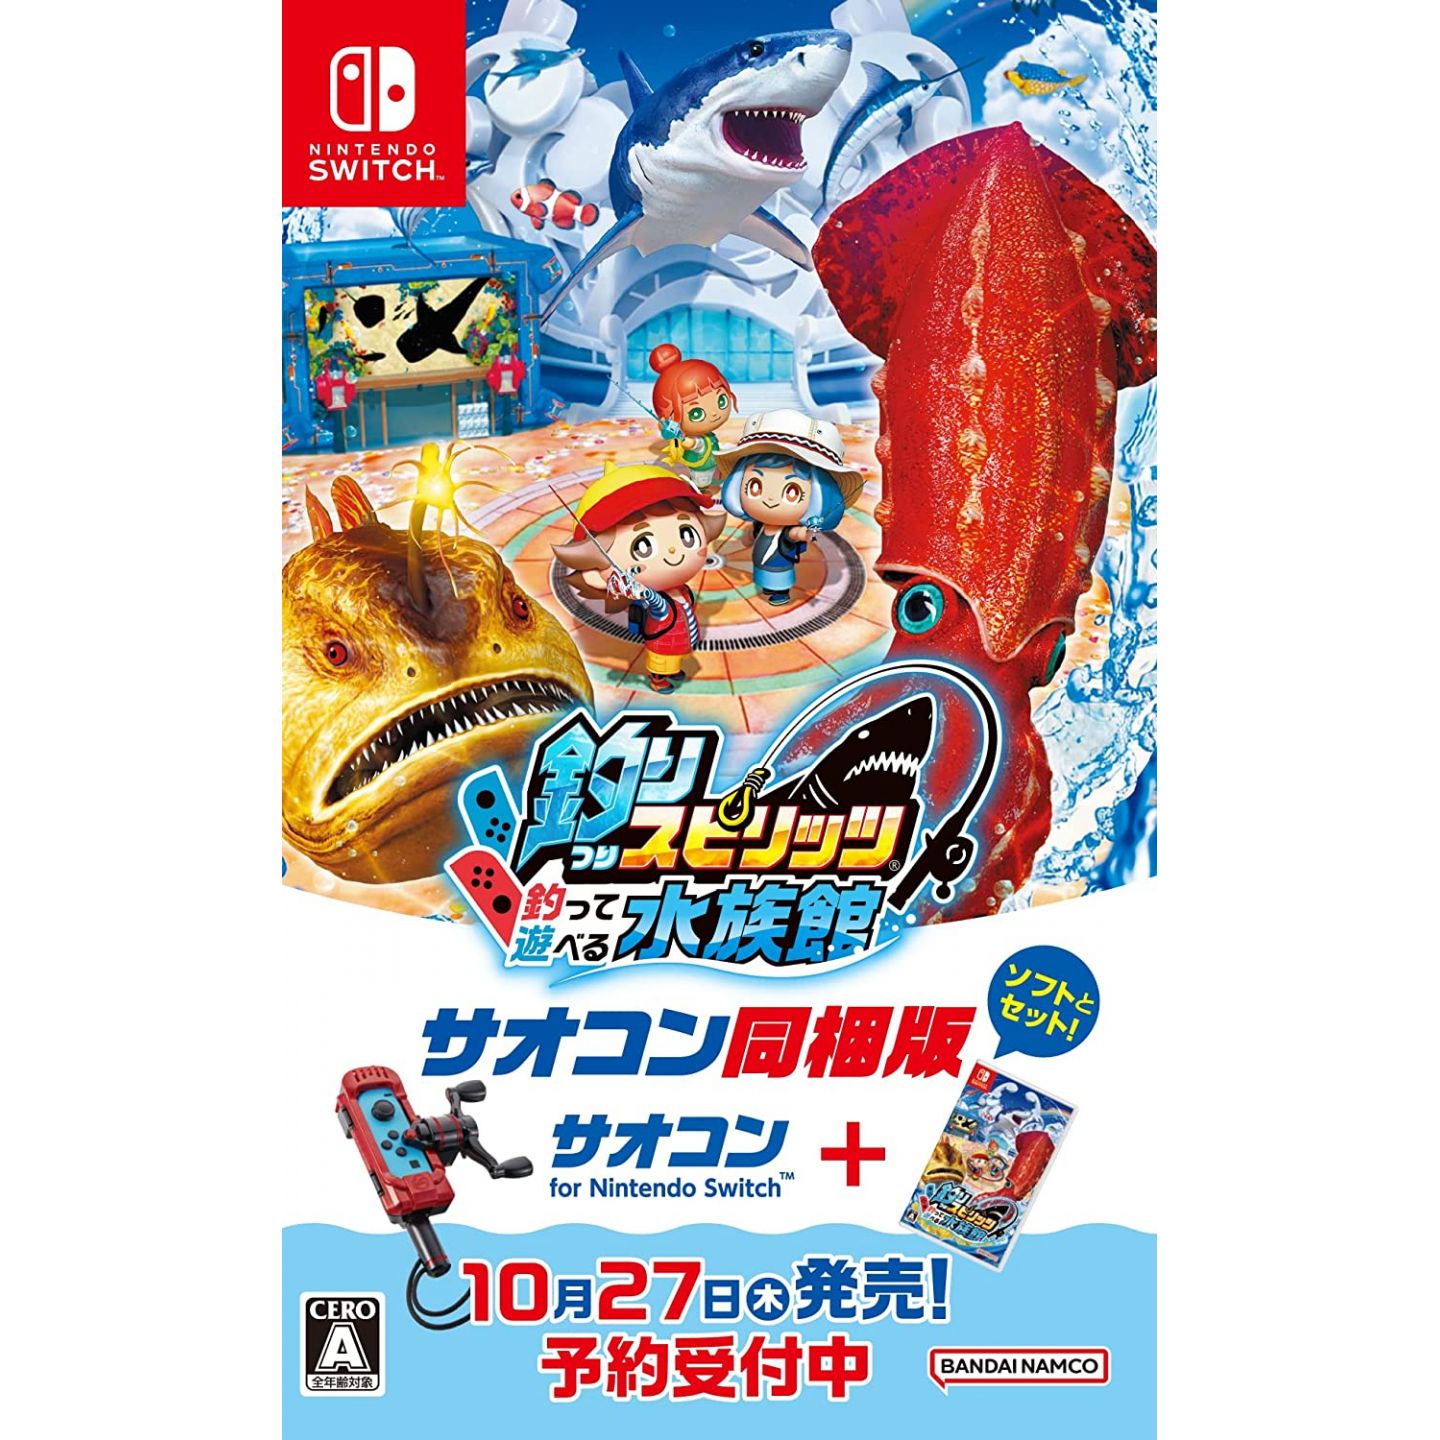 Trader Games - ACE ANGLER : FISHING SPIRITS SWITCH JAPAN NEW GAME IN  ENGLISH/JP on Nintendo Switch